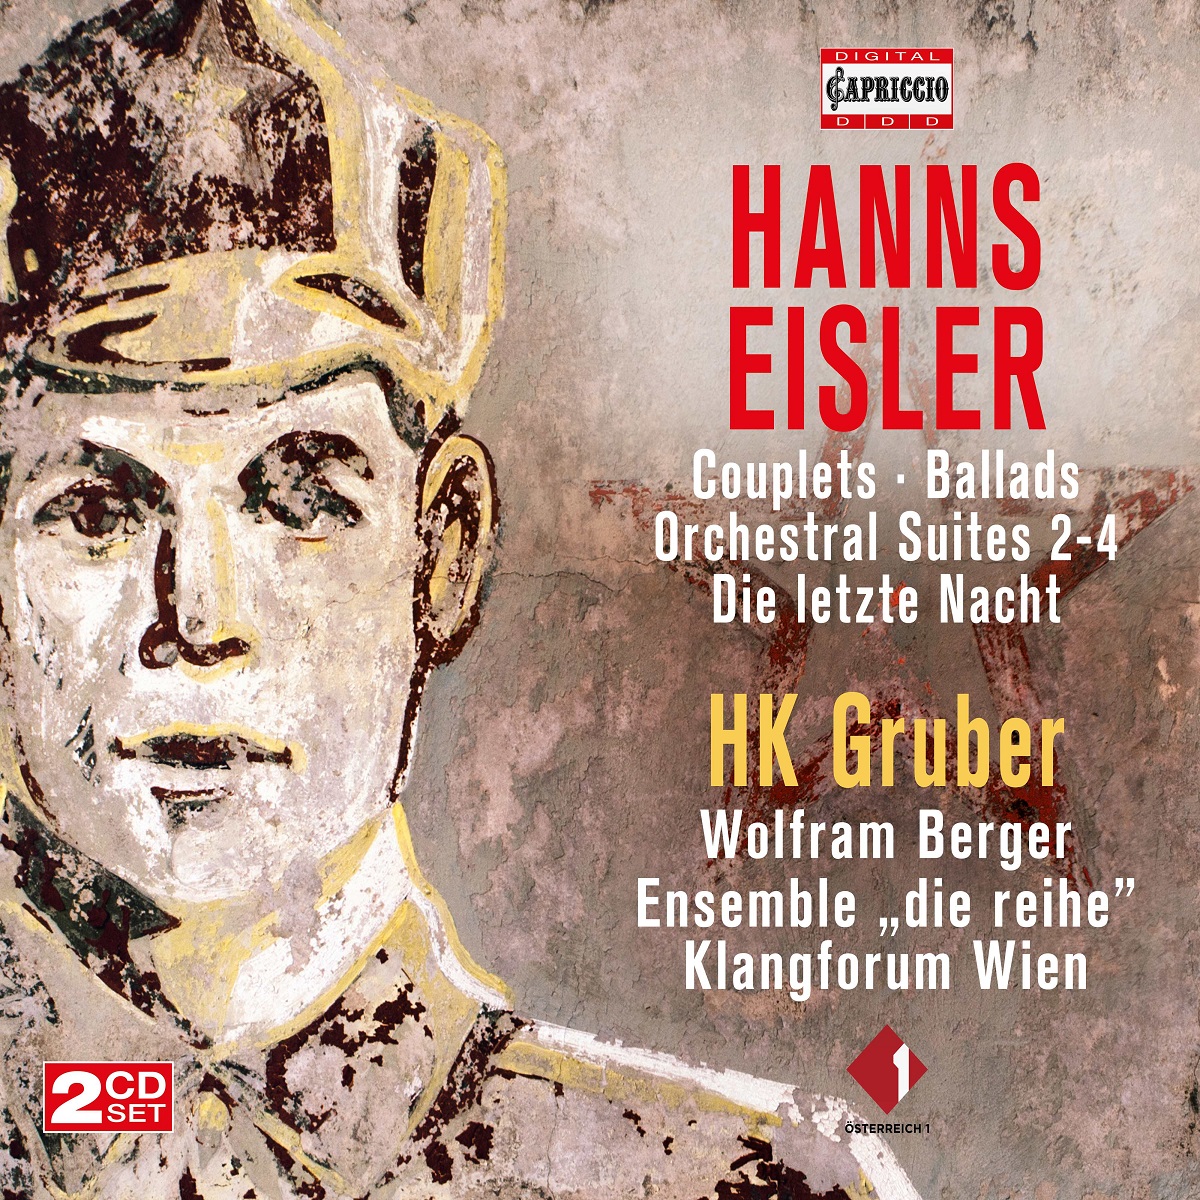 The cover of "Hanns Eisler: Couplets, Ballads, Orchestral Suits, Die letzte Nacht". (Photo: Capriccio)